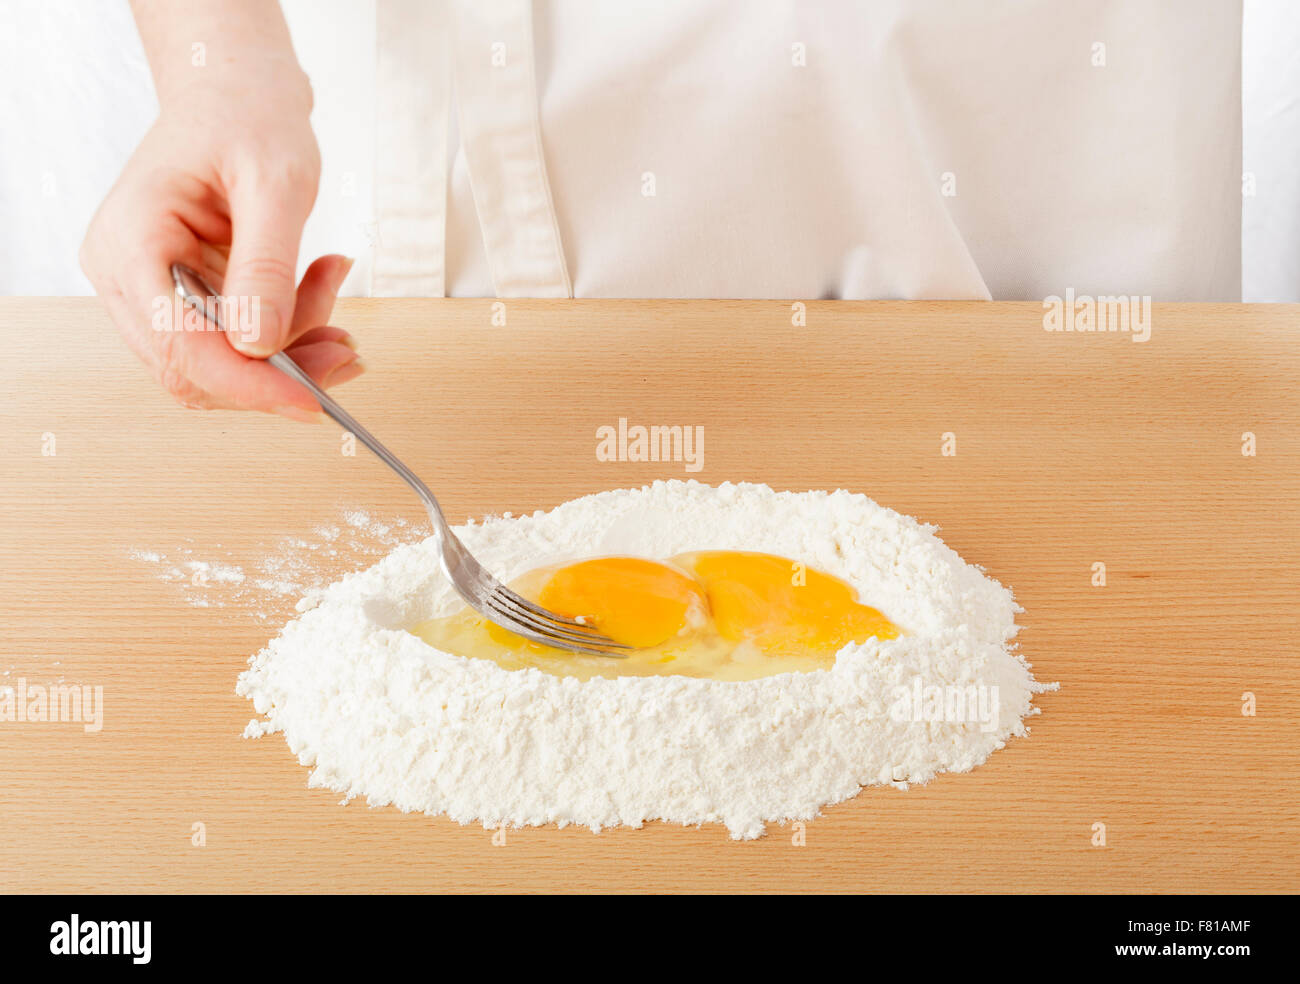 chef whisking eggs inside flour on worksurface for making pasta Stock Photo